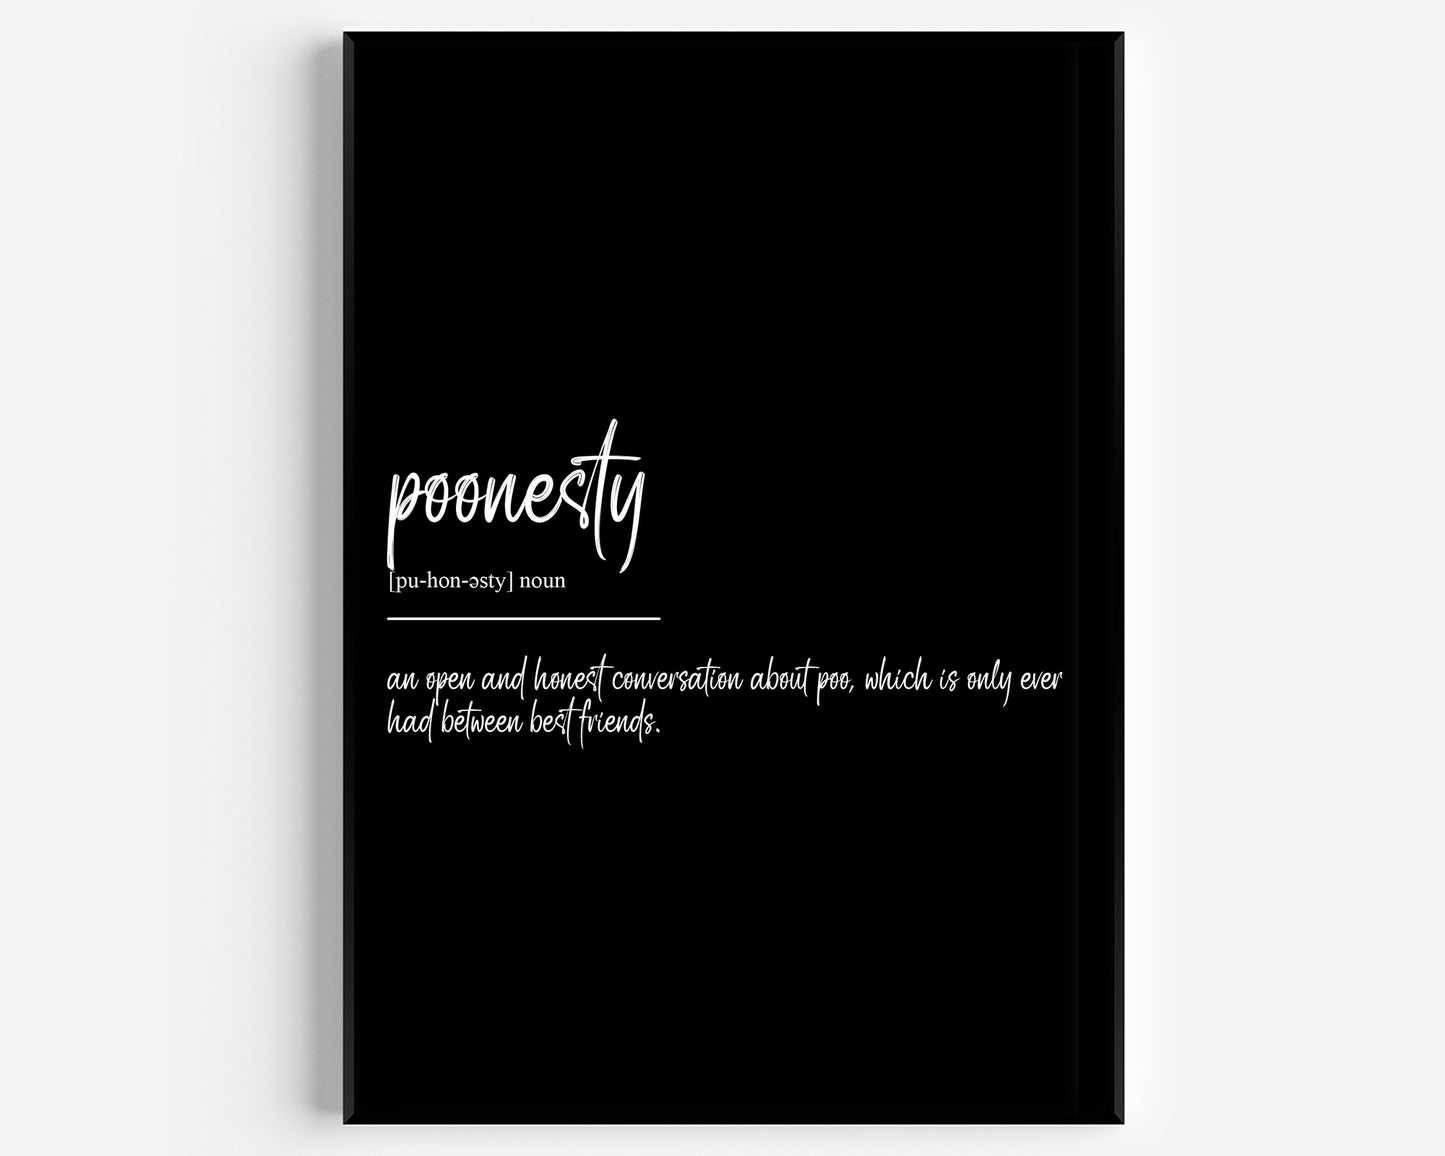 Poonesty Definition Print - Magic Posters